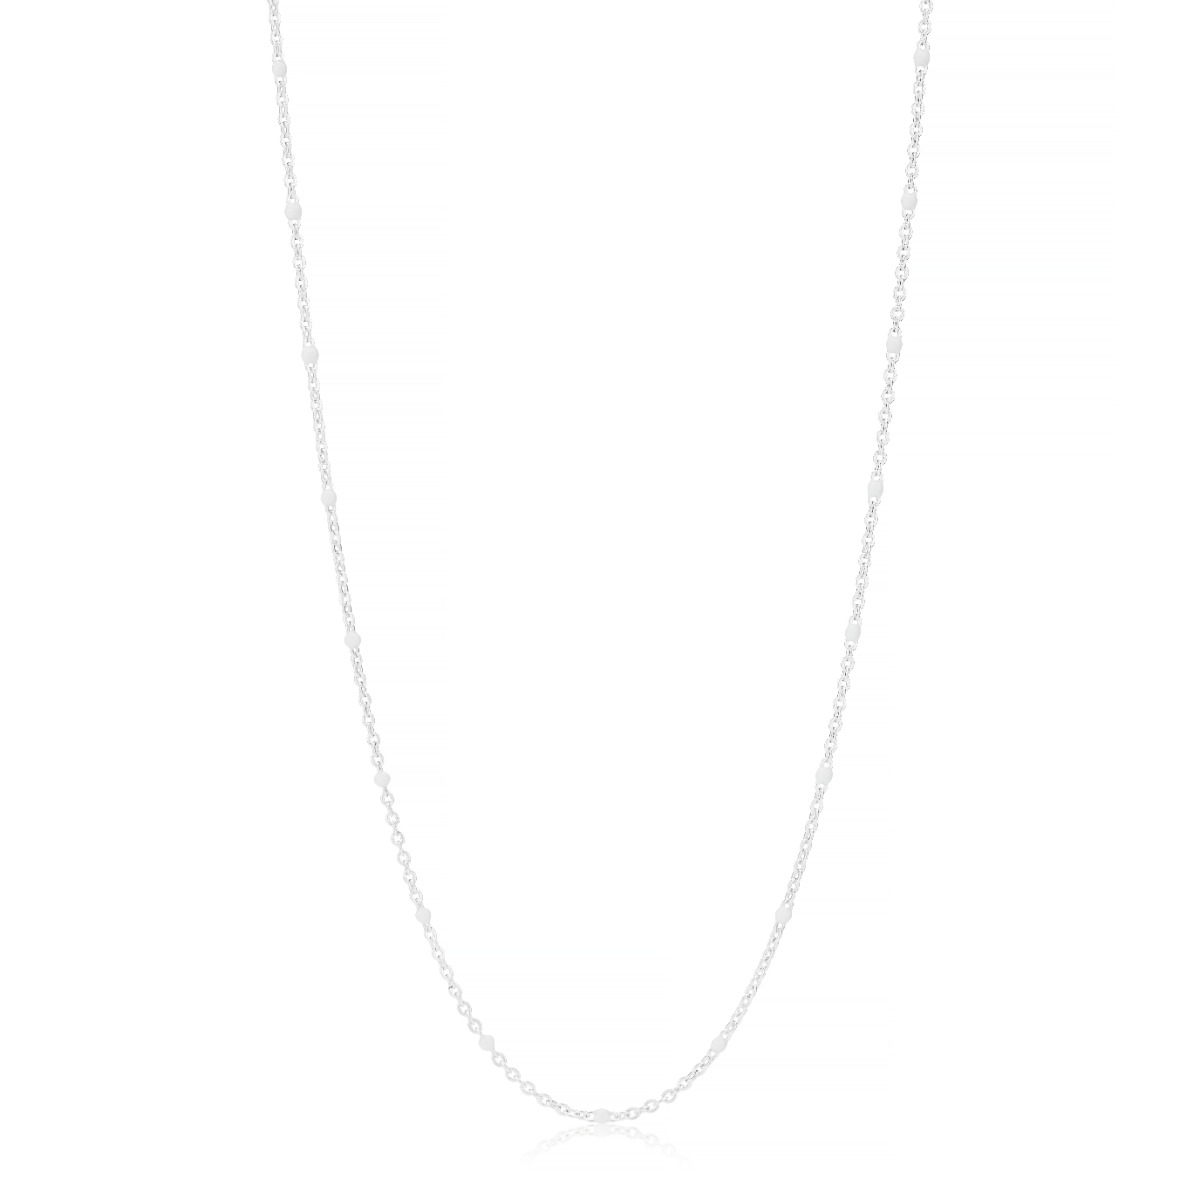 Little Treasure White Sterling Silver Necklace